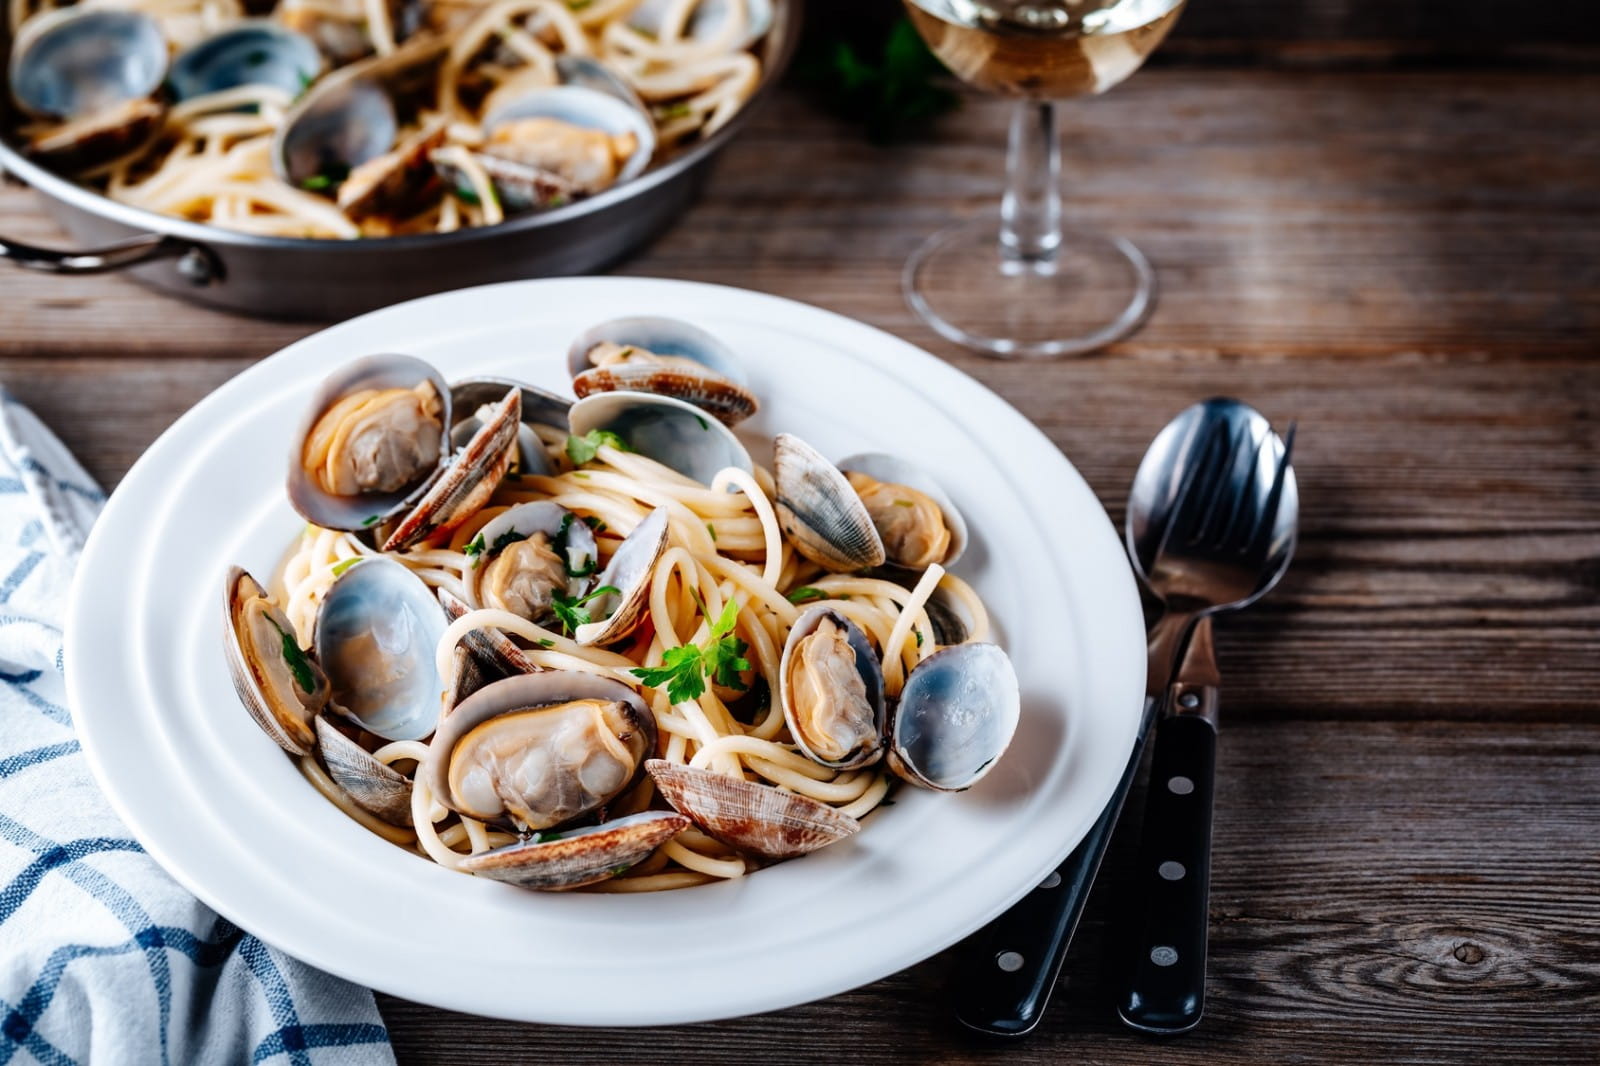 The best wine pairings for spaghetti alle vongole